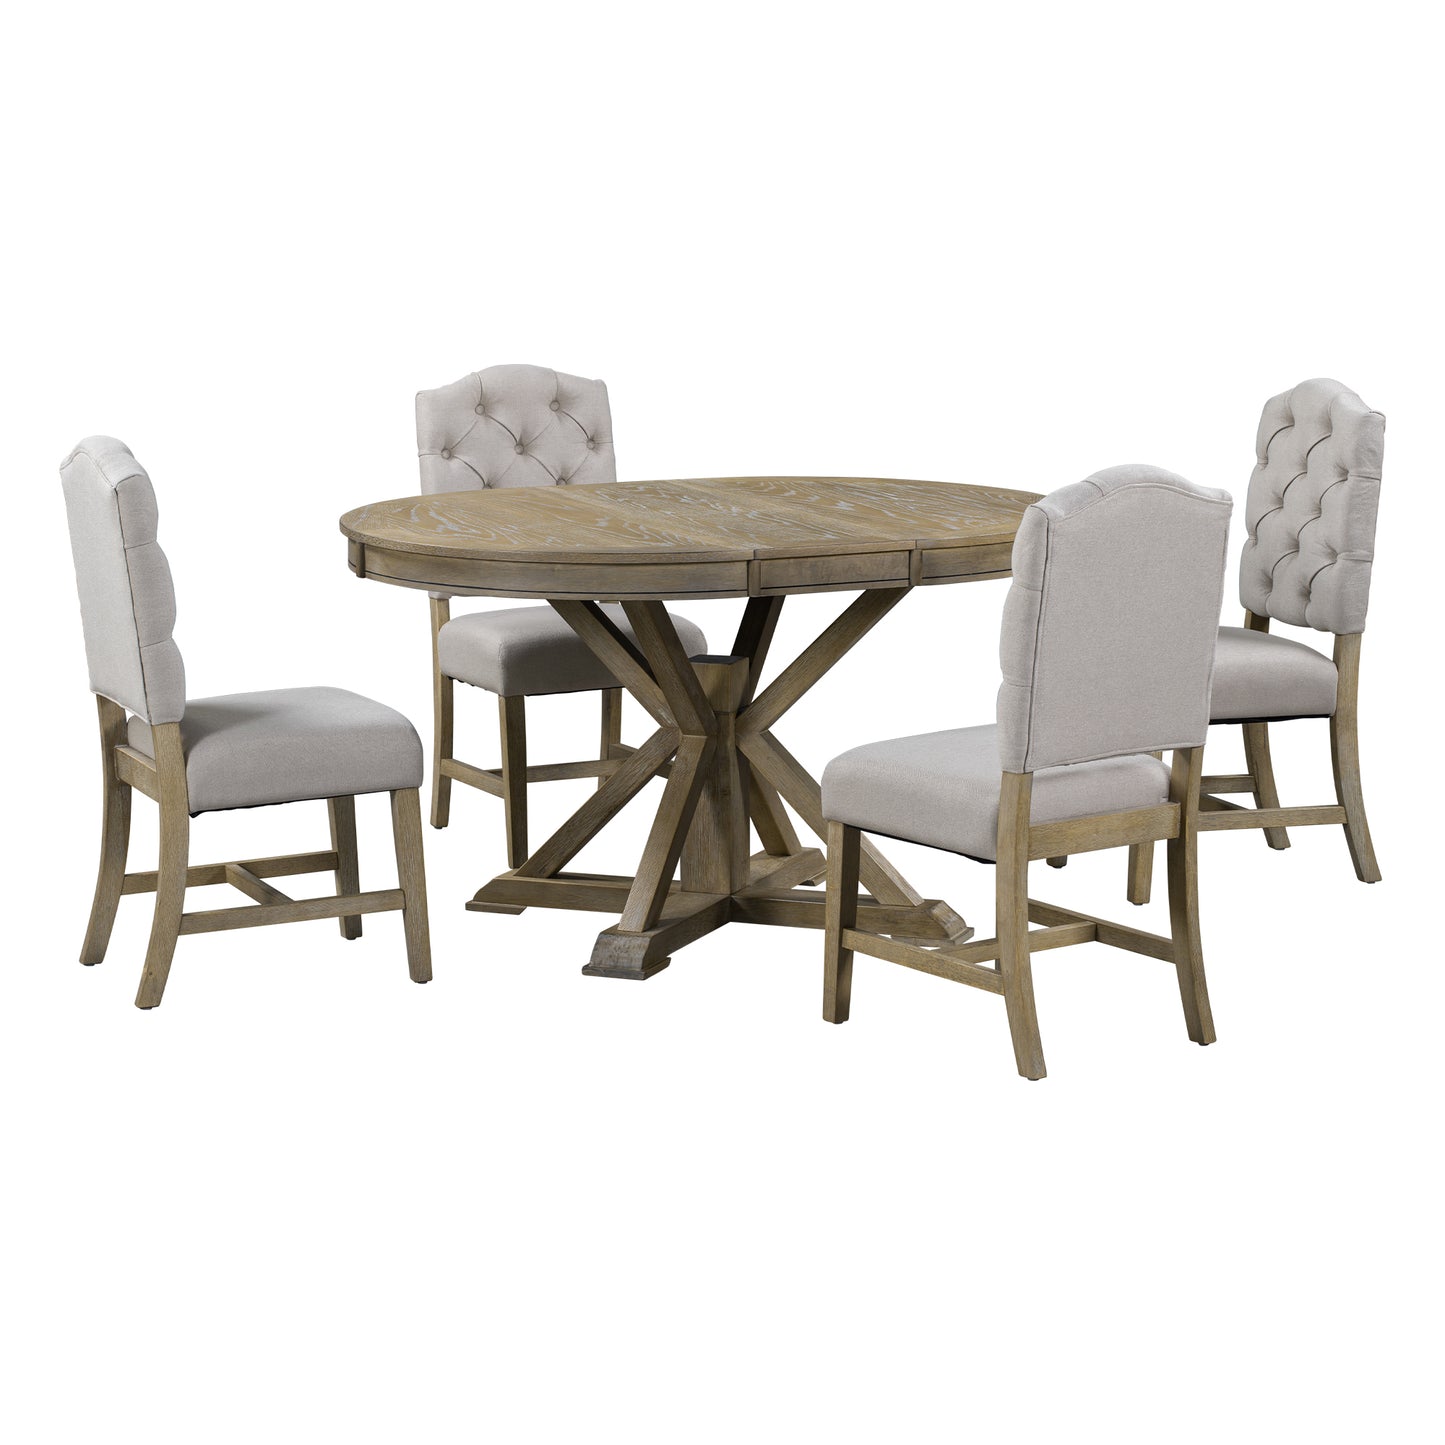 Upholstered Retro Style Dining Table Set with Extendable Leaf and 4 Chairs